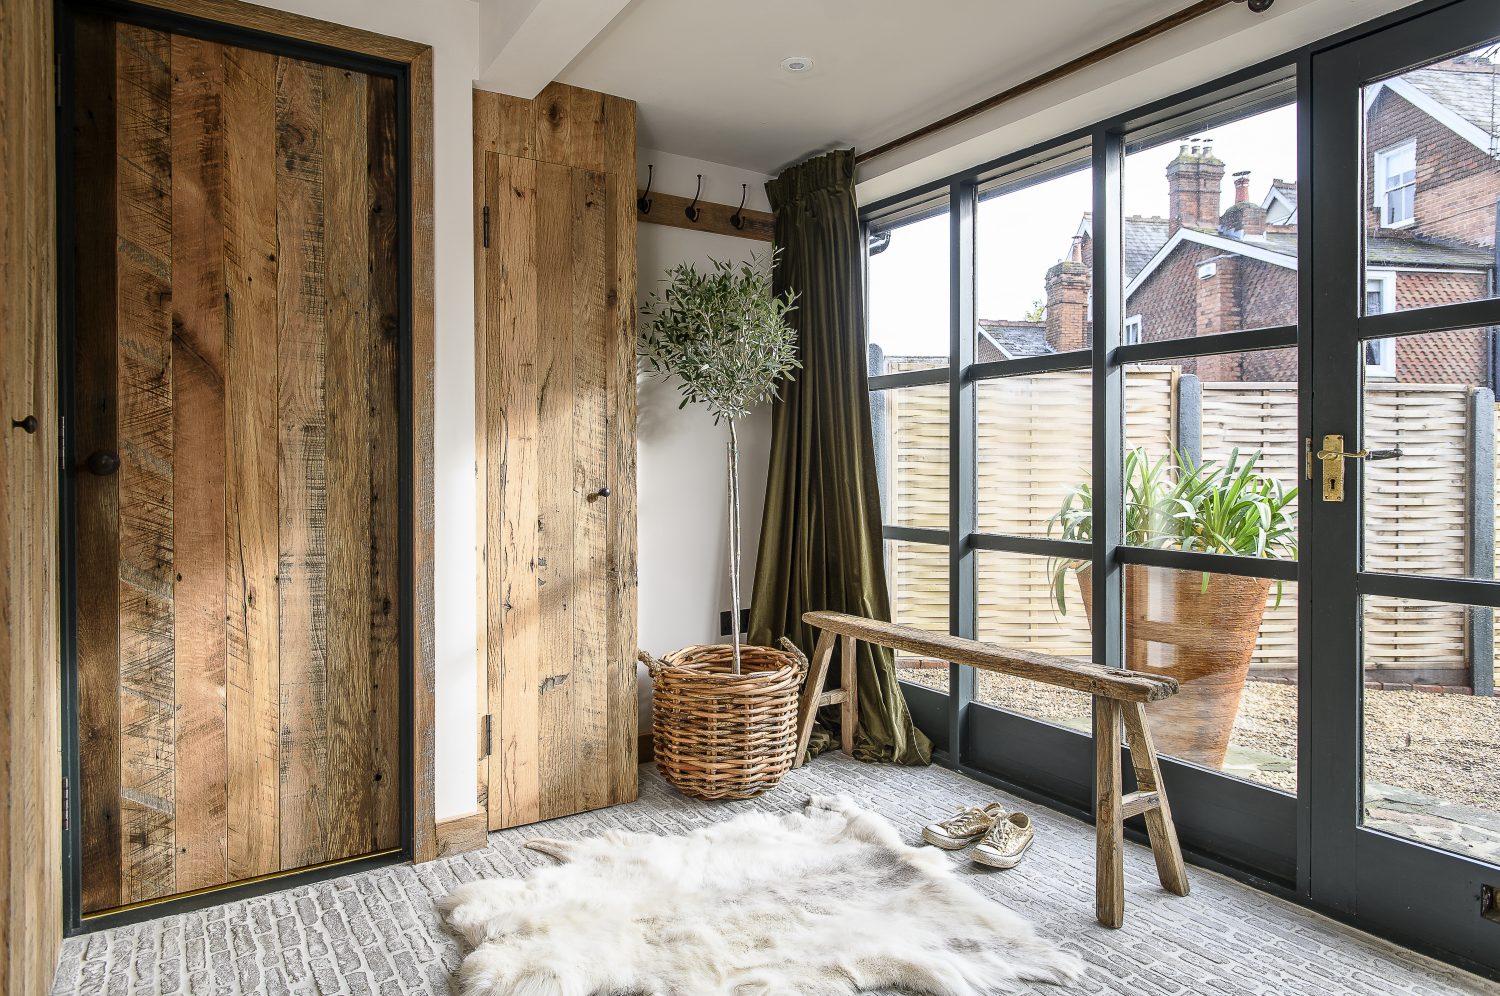 “All the doors are made from reclaimed Mississippi oak floorboards.” This gives them their rich warm colour and contrasts beautifully with the central section of the door frames, painted in a smokey blue